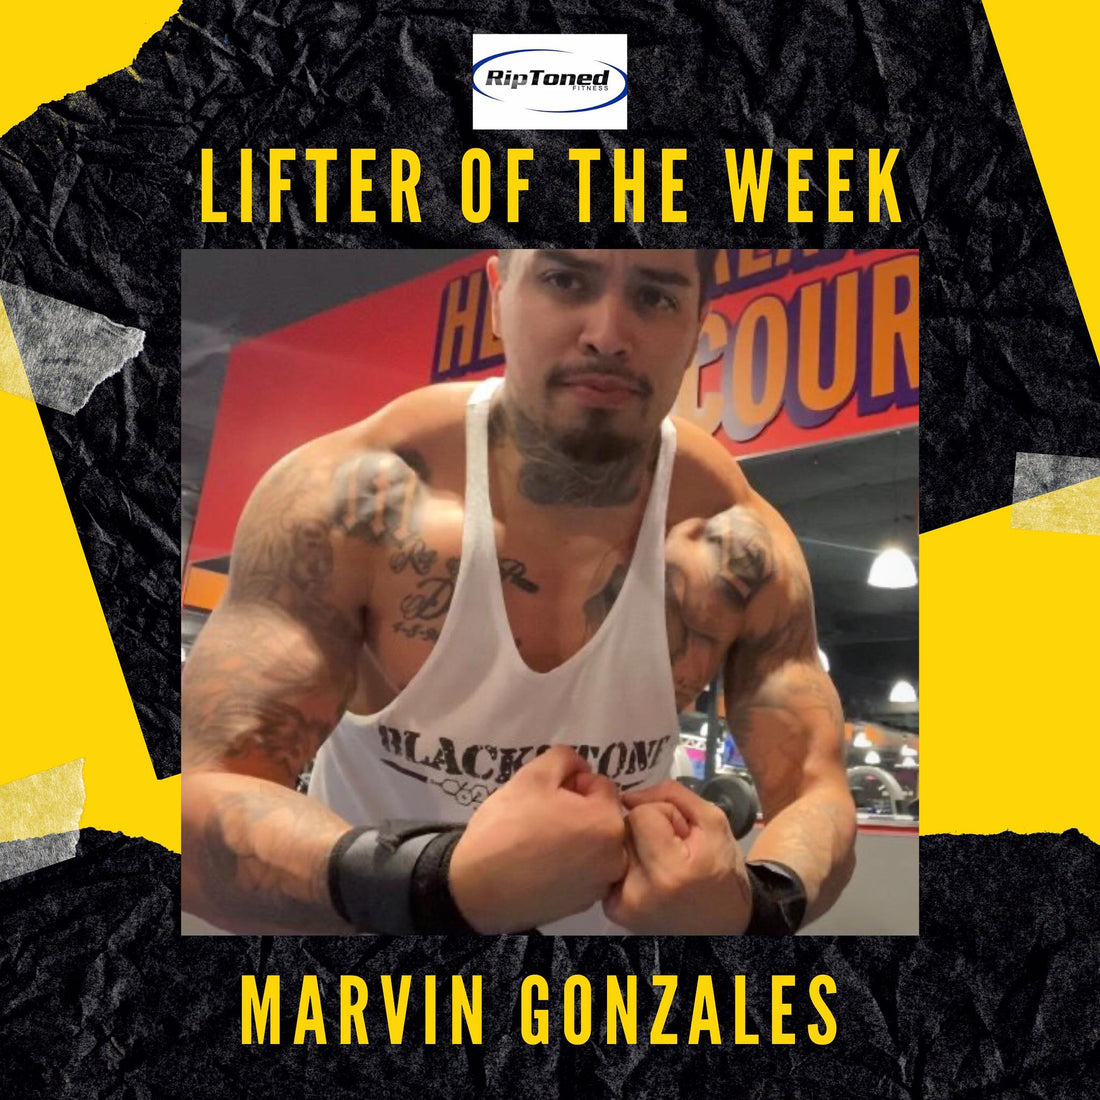 Lifter of the Week - Marvin Gonzales - Rip Toned